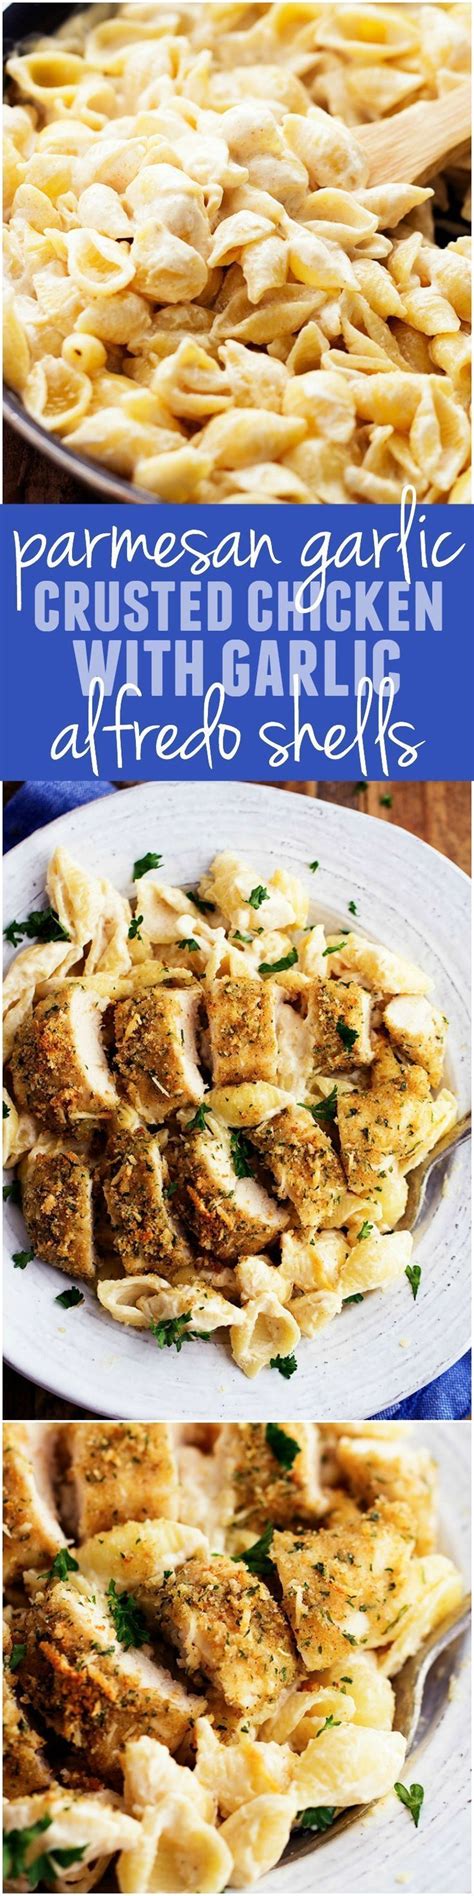 This super easy parmesan crusted chicken recipe tastes just like the longhorn restaurant! Parmesan Garlic Crusted Chicken with Garlic Alfredo Shells ...